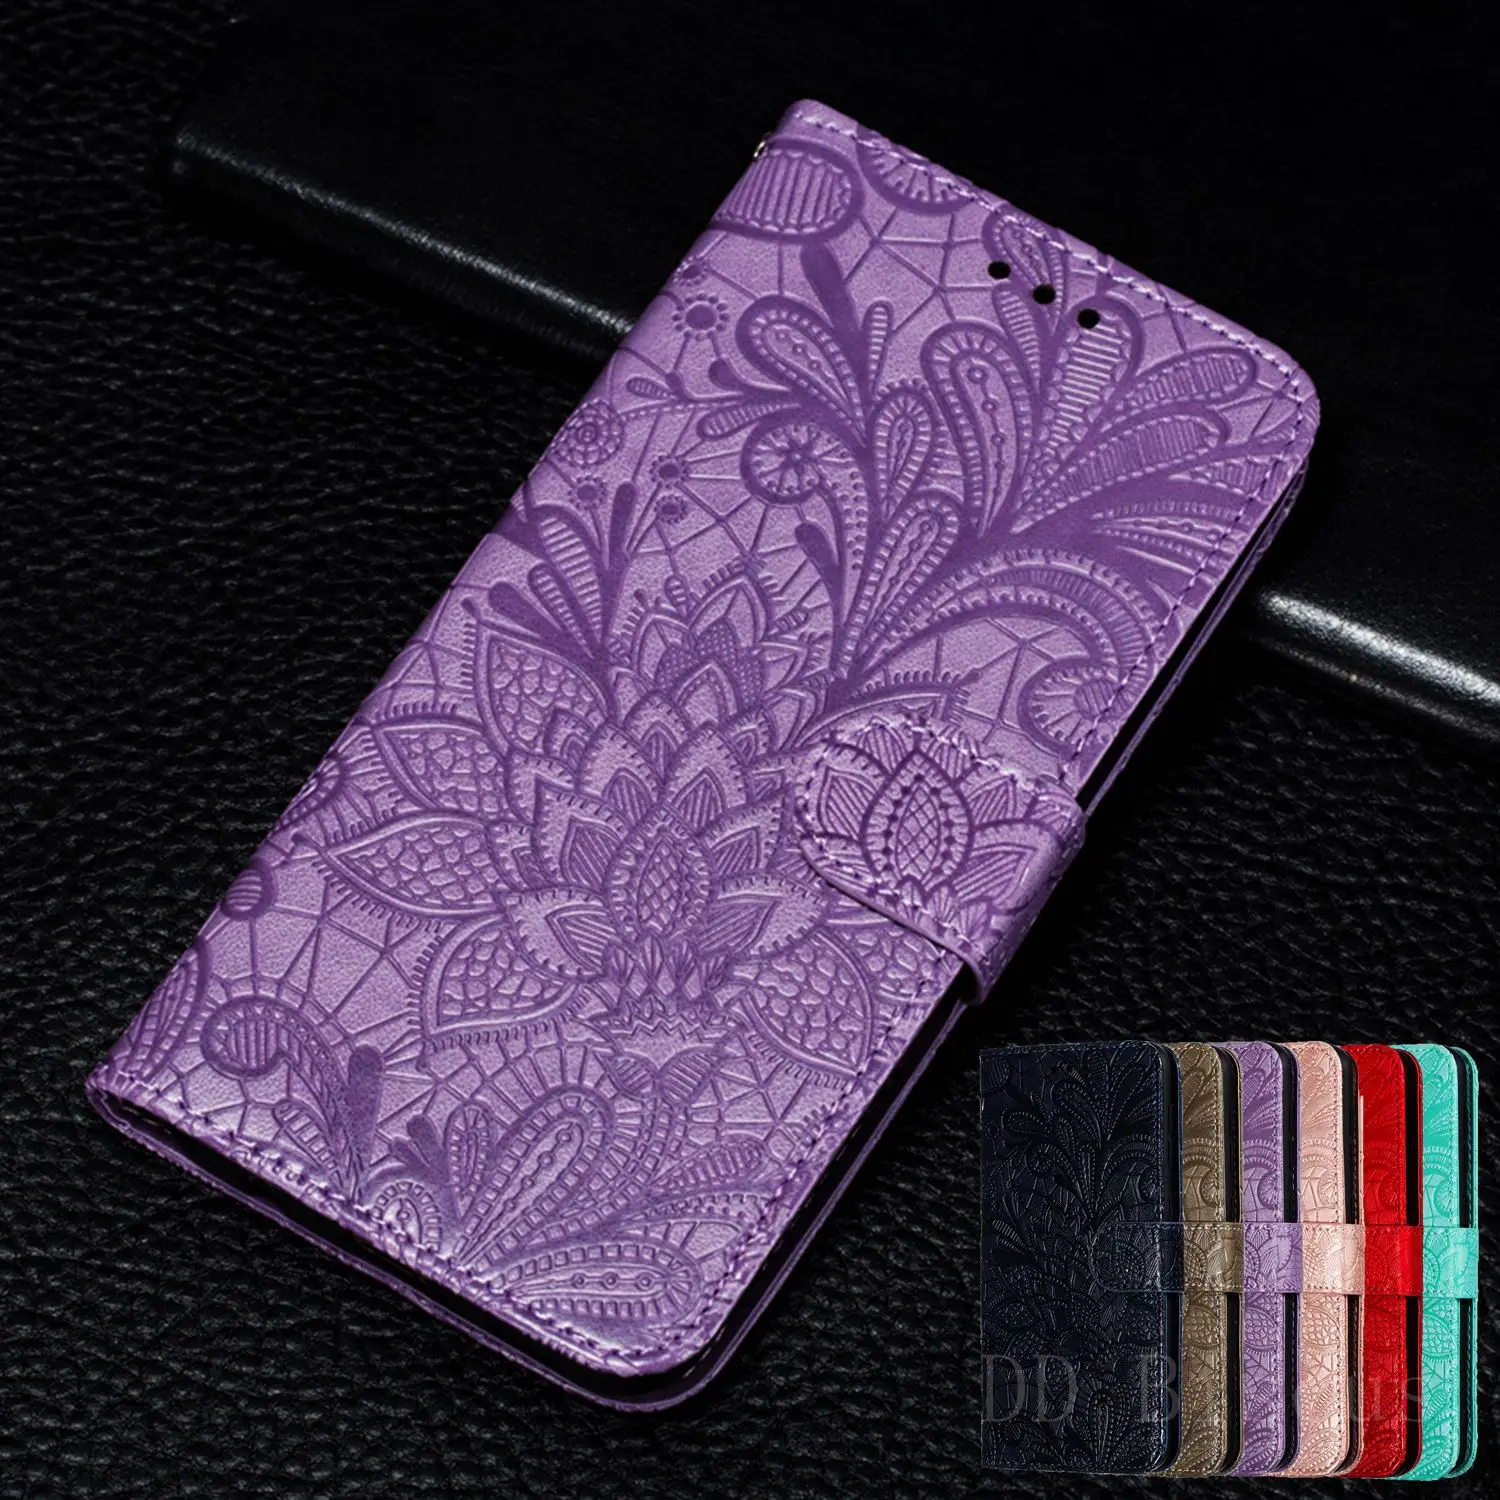 

Huawei Honor 20 Pro 9X 10i 10 Lite 7A 7C 8A 9A 9S 9C 8S 8X 20S 9 Lite Y5 Y7 Y6 2019 Leather Case 3D Embossing Lace flower wallet